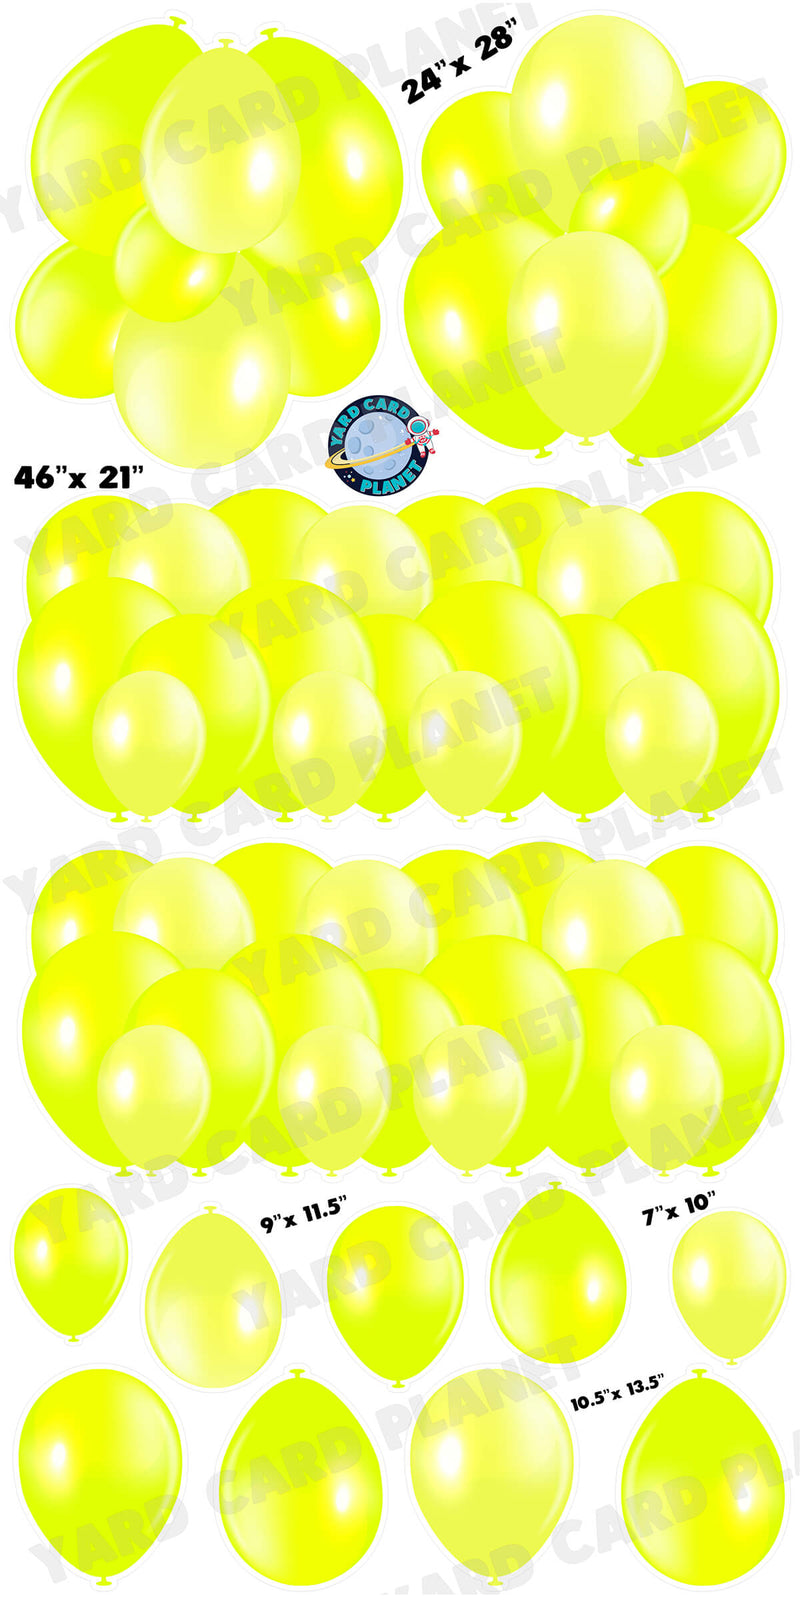 Neon Yellow Balloon Panels, Bouquets and Singles Yard Card Set